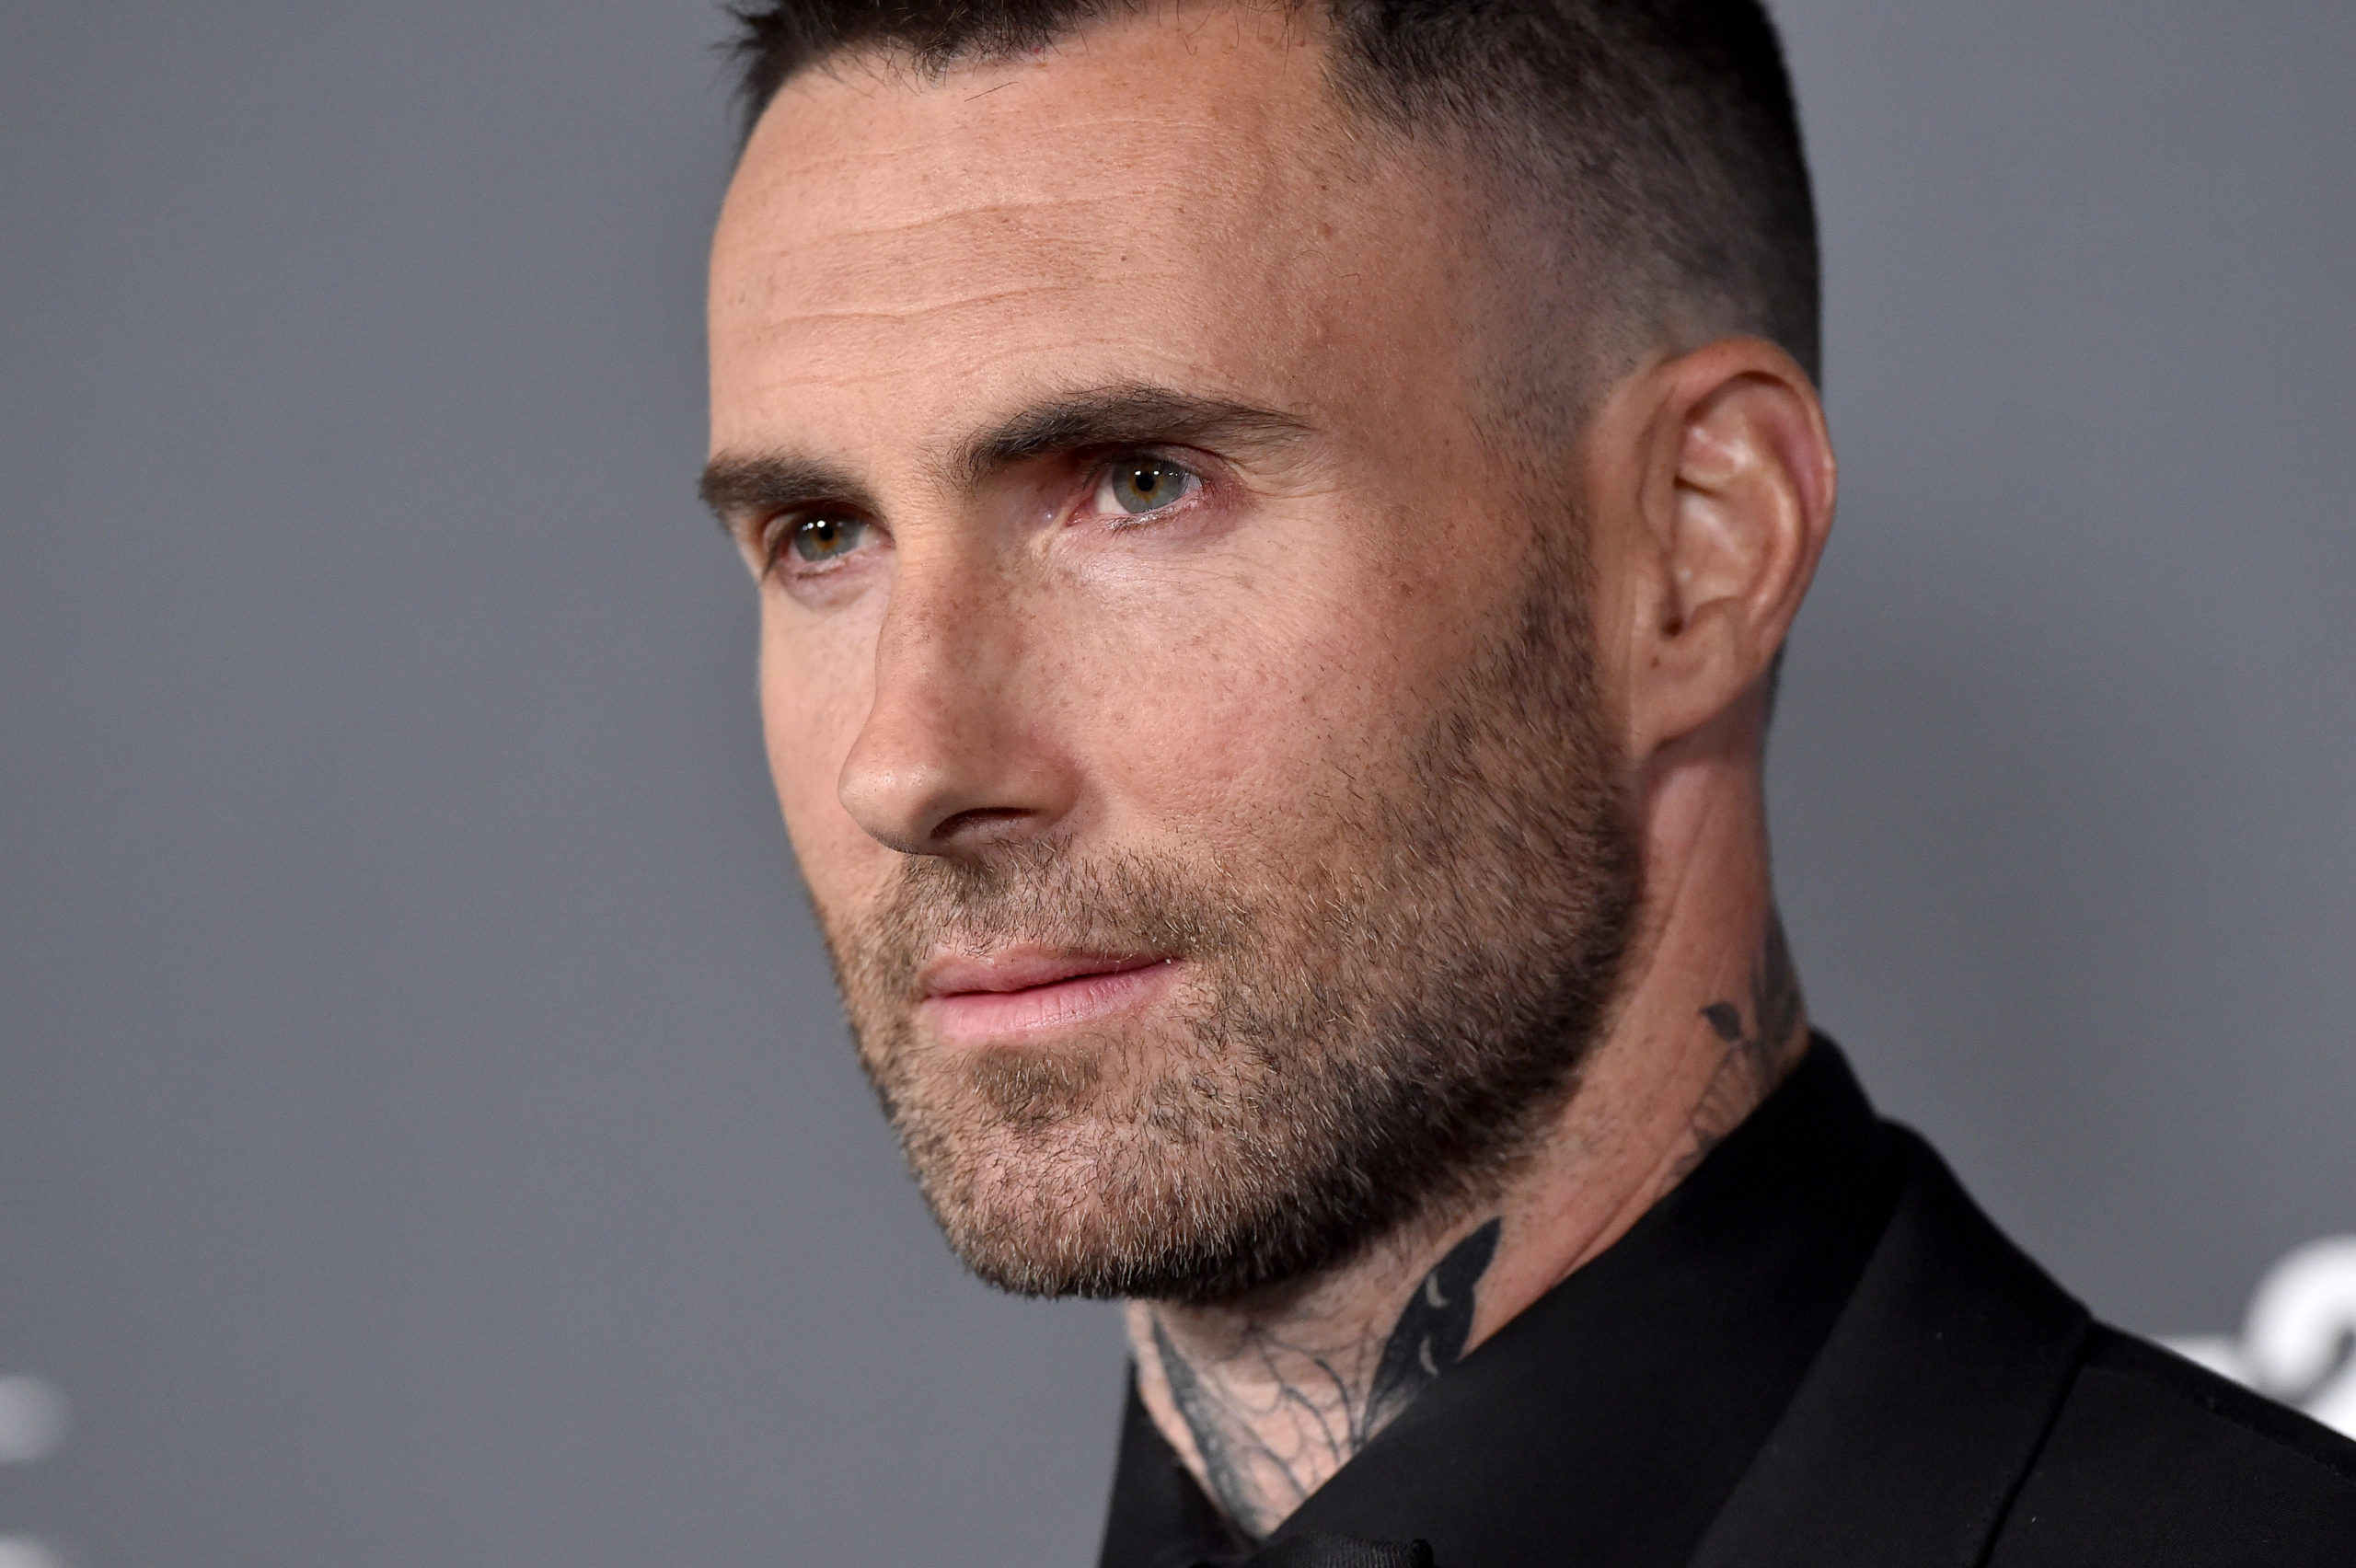 Adam Levine reacts to alleged betrayal and confesses: 'I crossed a line at some point in my life'